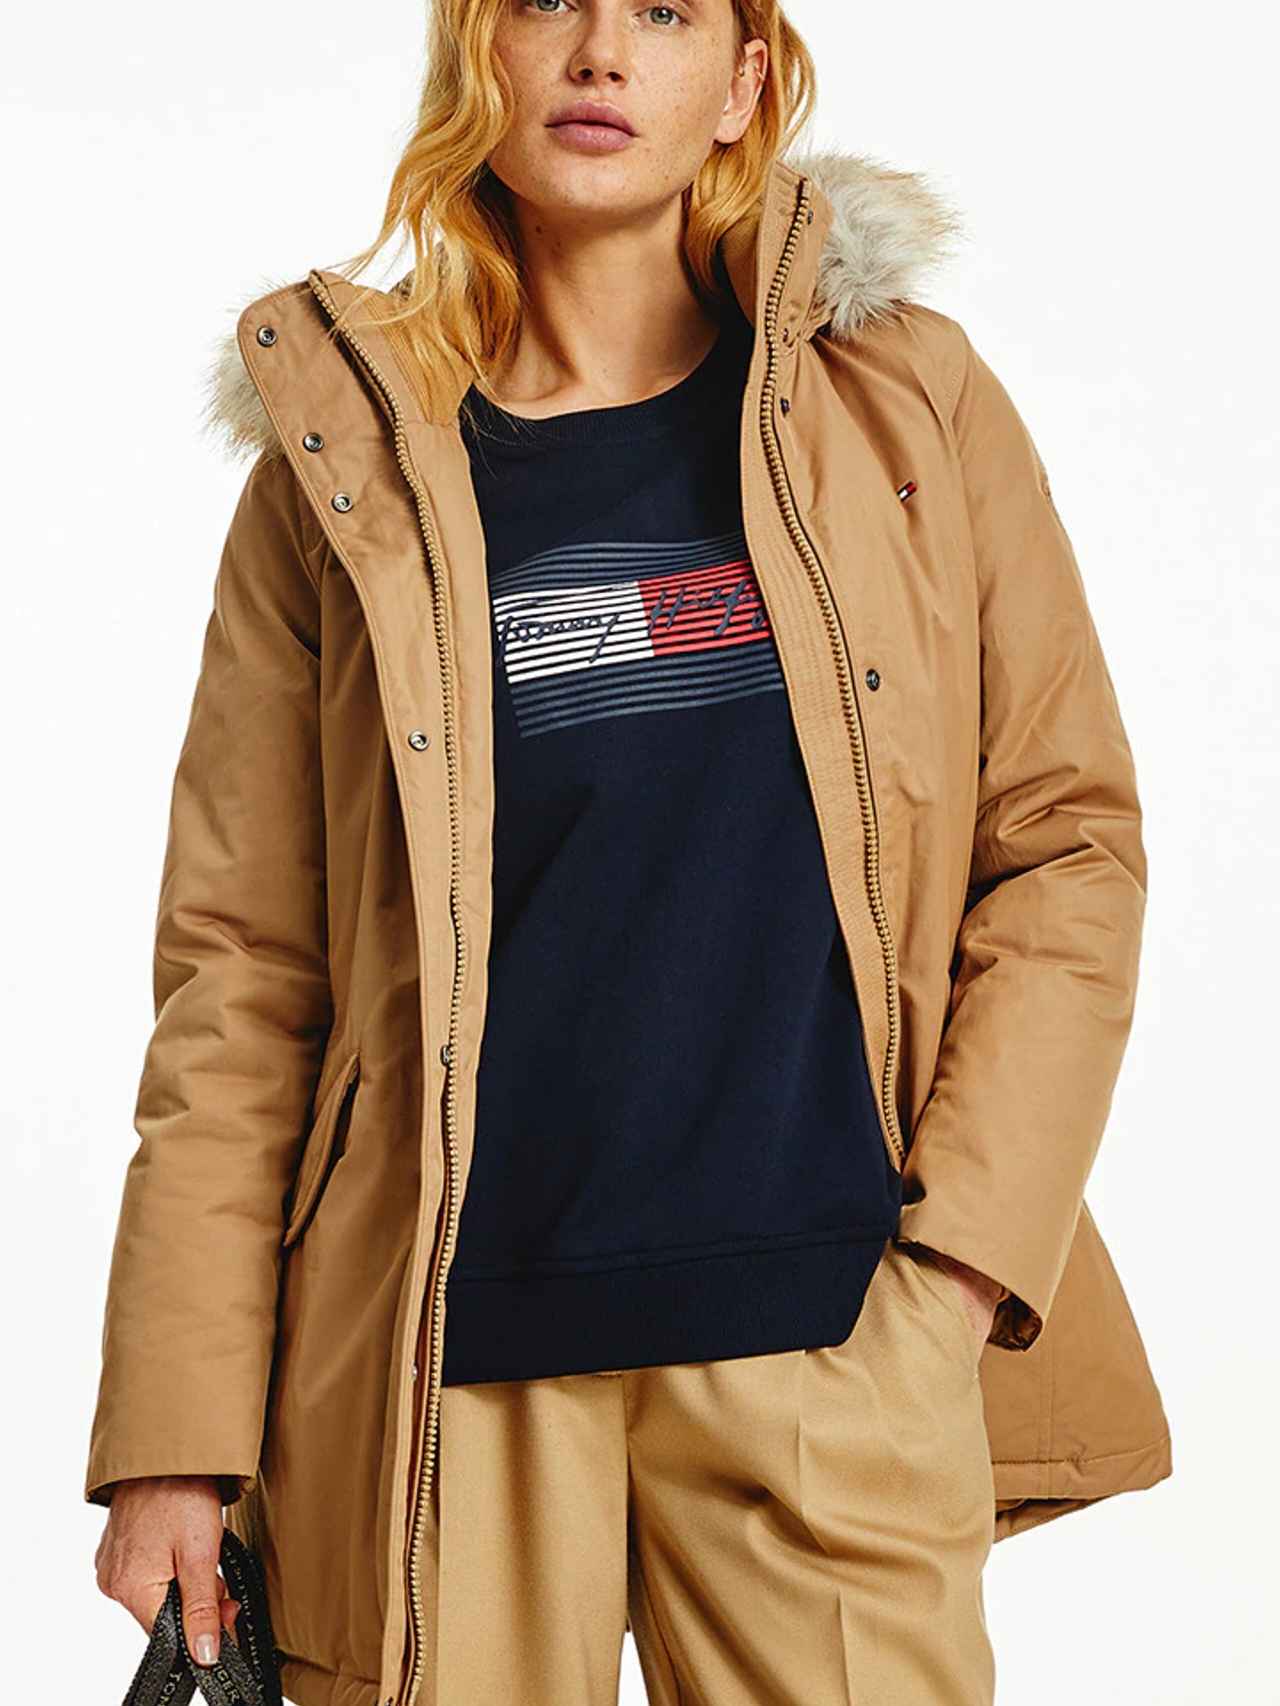 Parka Impermeable Mujer 01